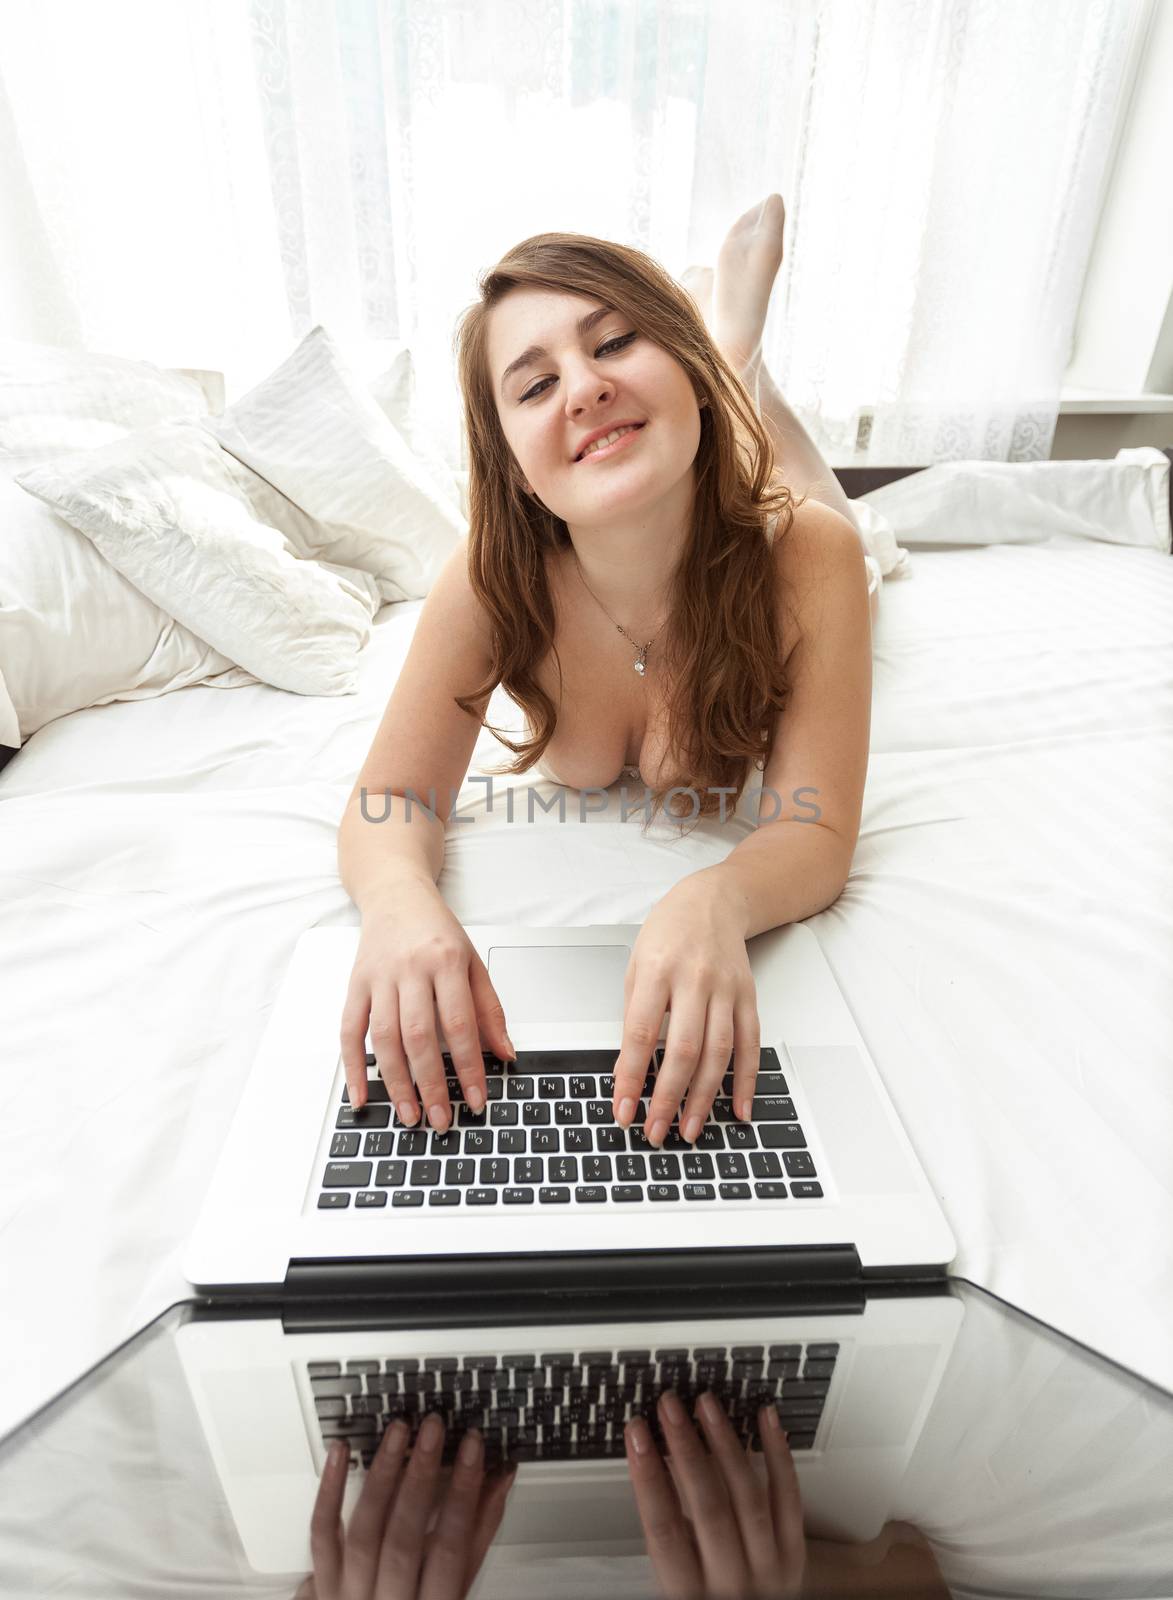 sexy woman with laptop in bed by Kryzhov